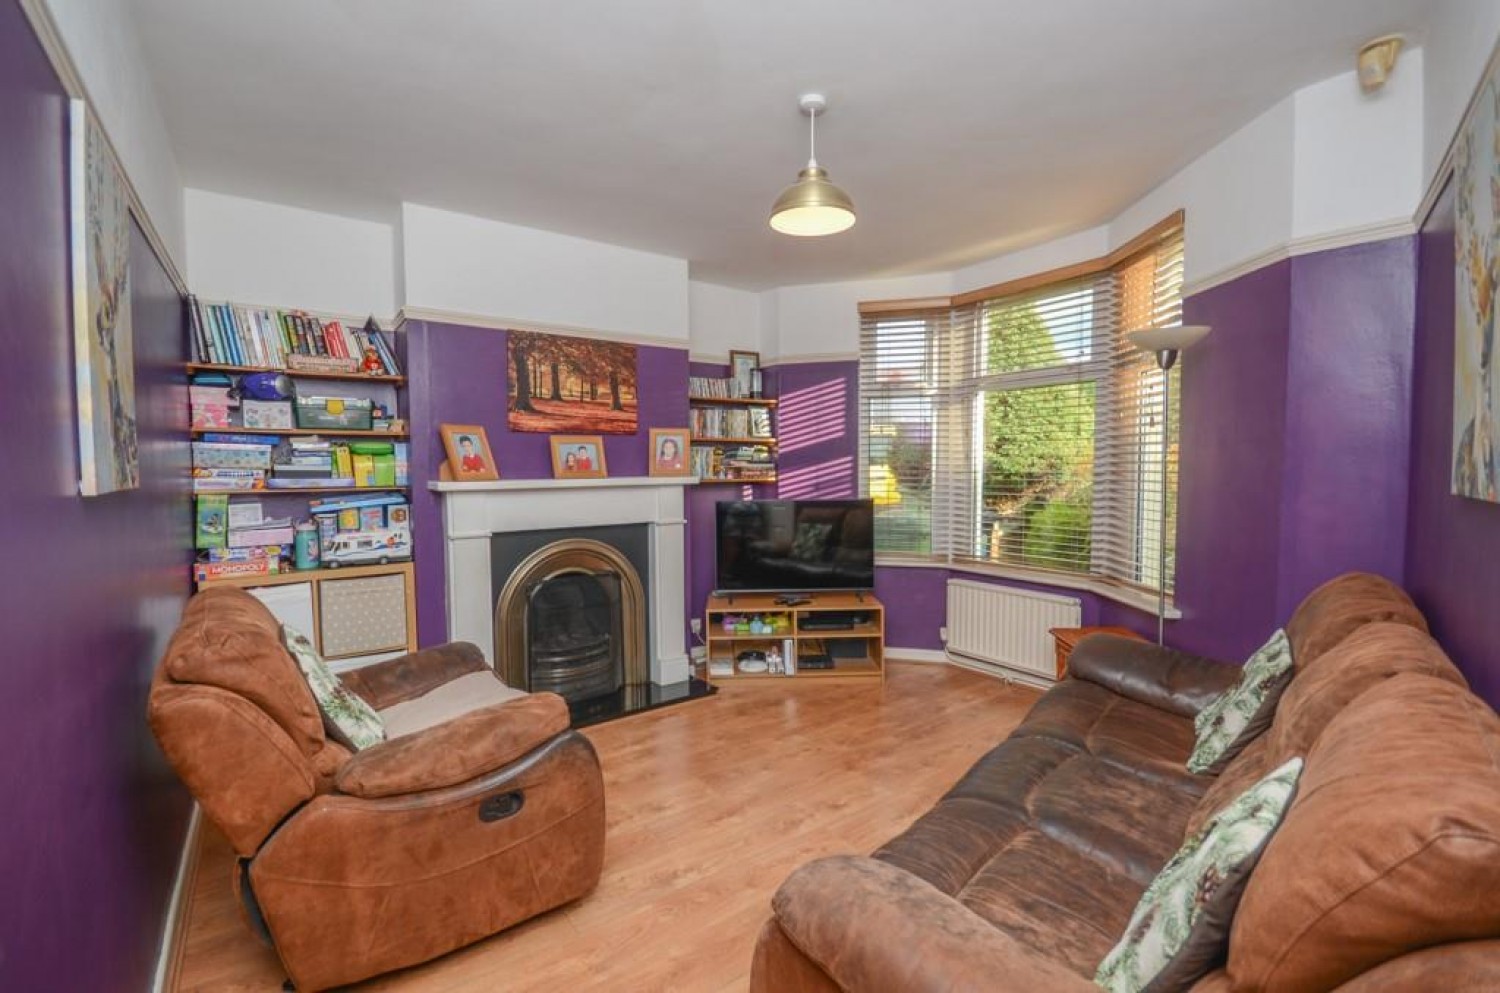 Morley Road, Staple Hill, Bristol, BS16 4QY